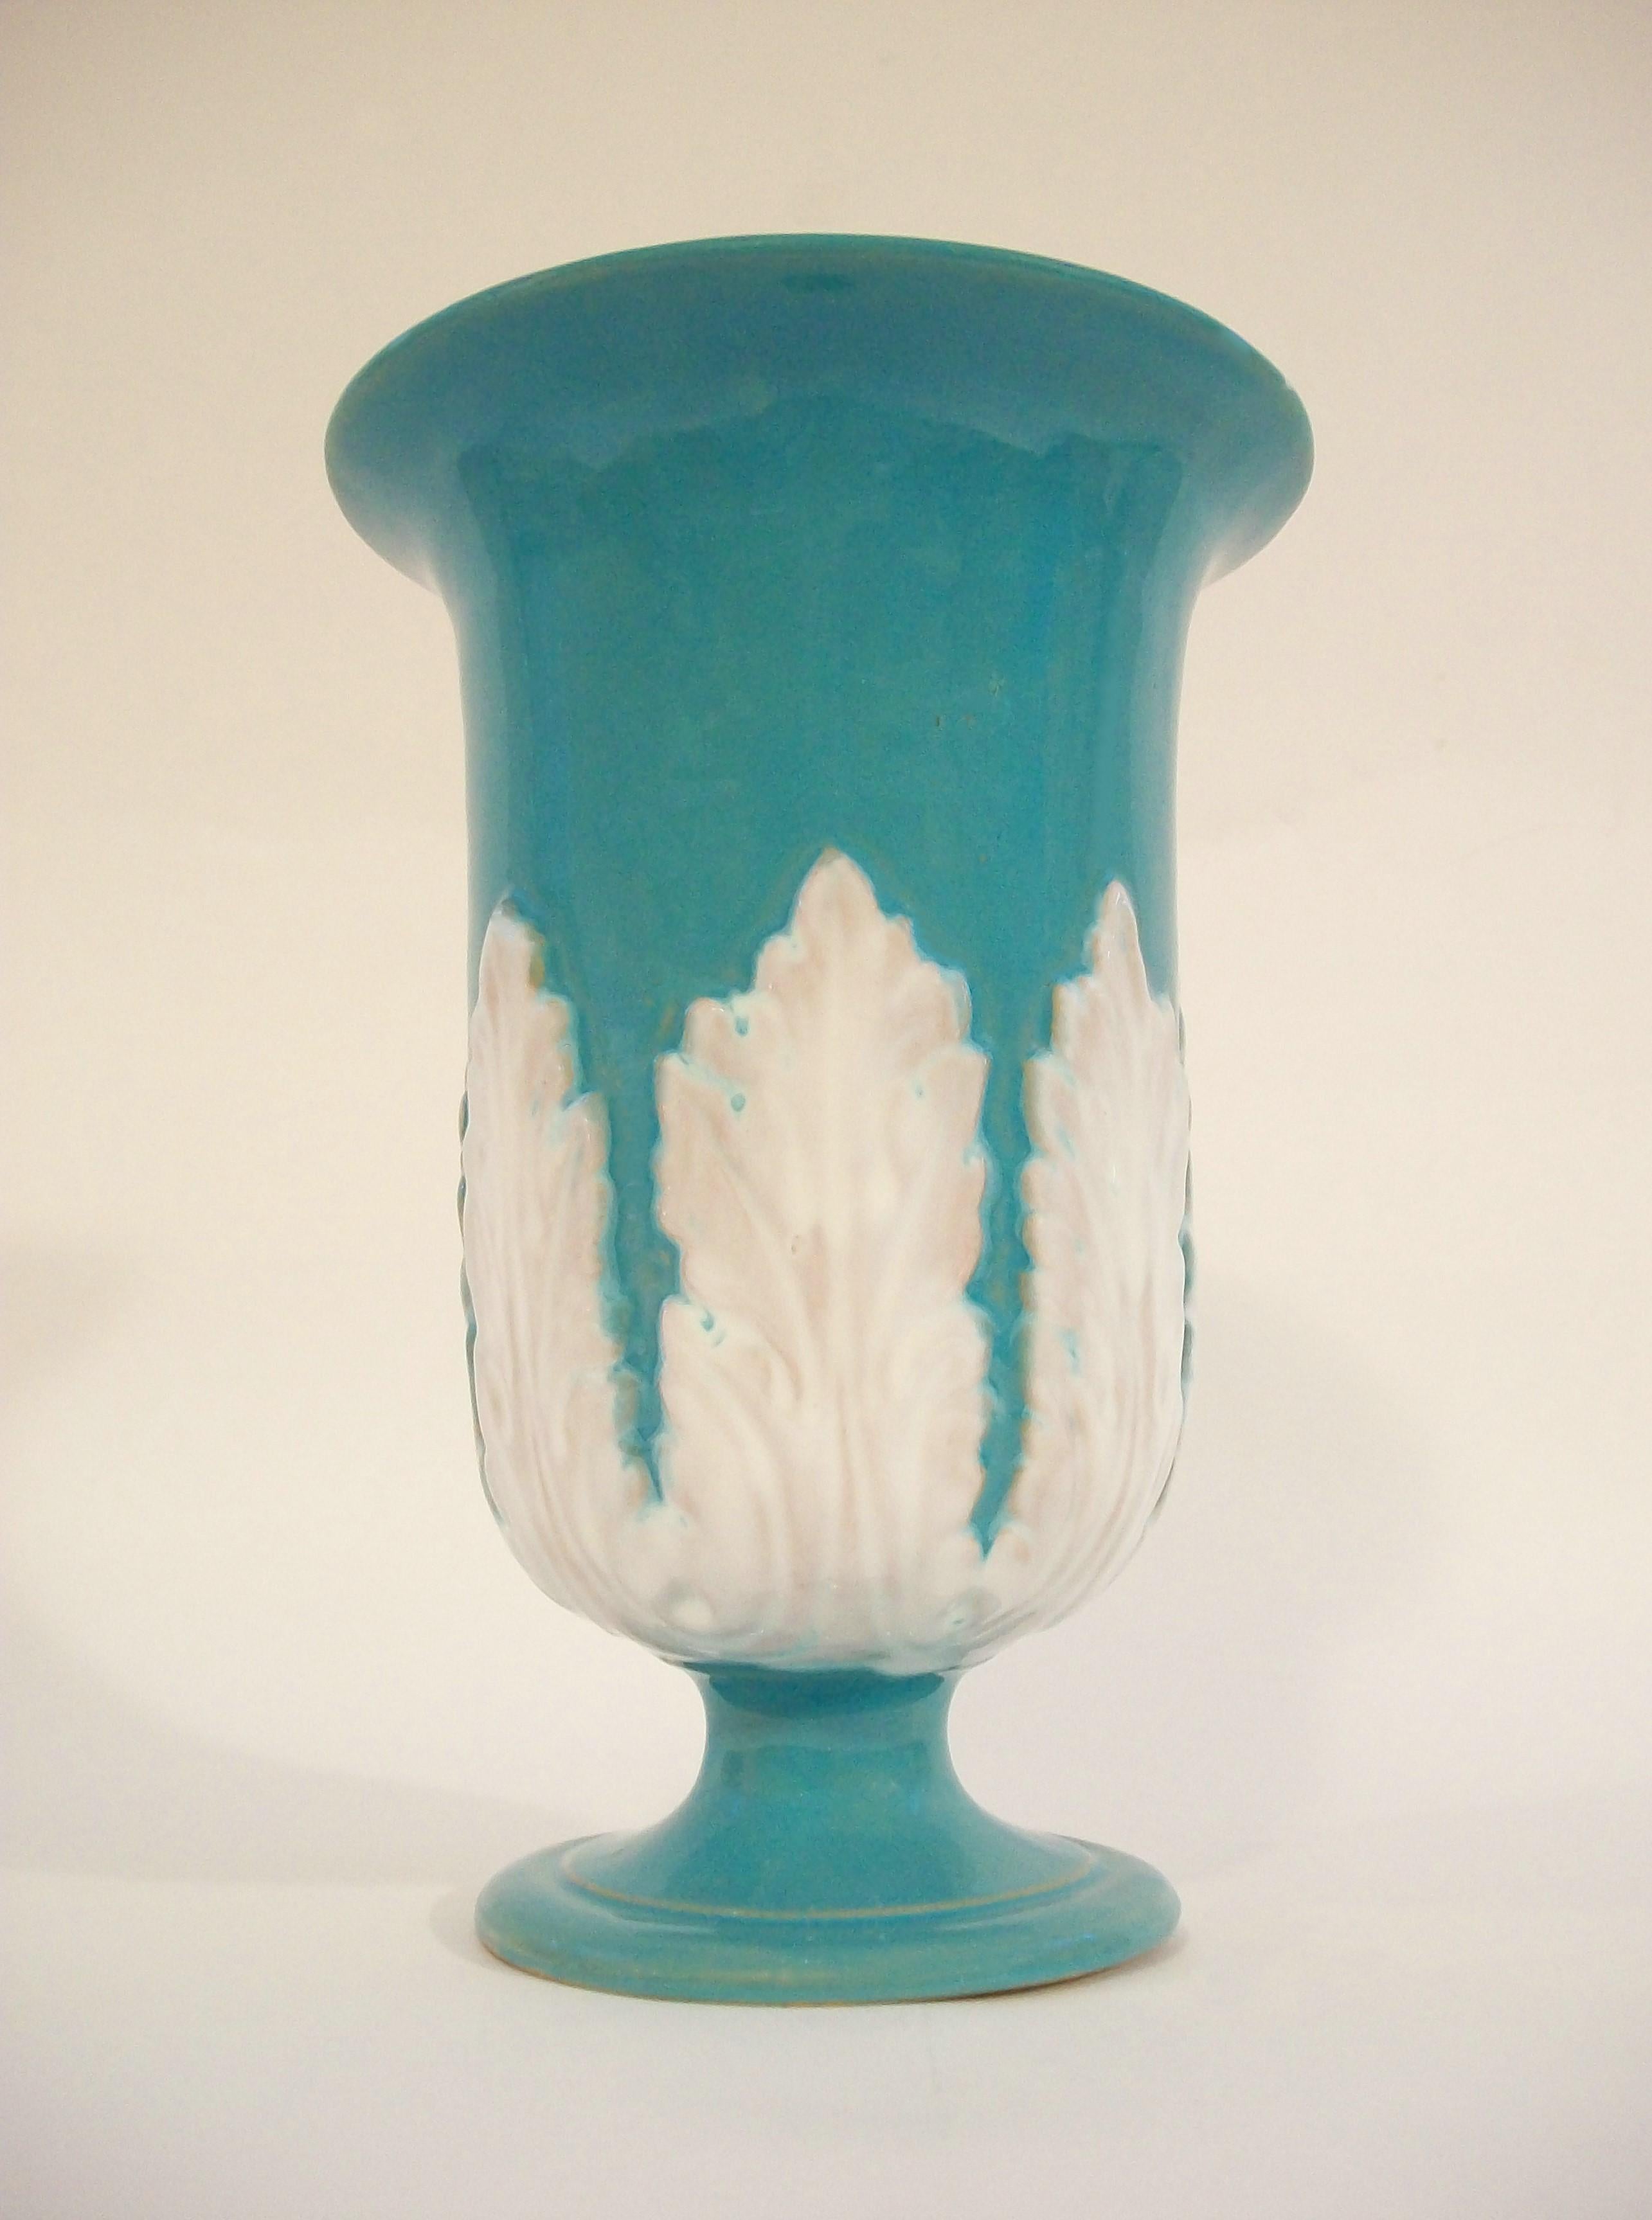 Large Hollywood Regency turquoise glazed trumpet shaped terracotta vase - featuring white glazed acanthus leaves to the mid section - tapered socle base - glazed interior - unsigned - model number 4021.90 and Italy to the bottom - circa